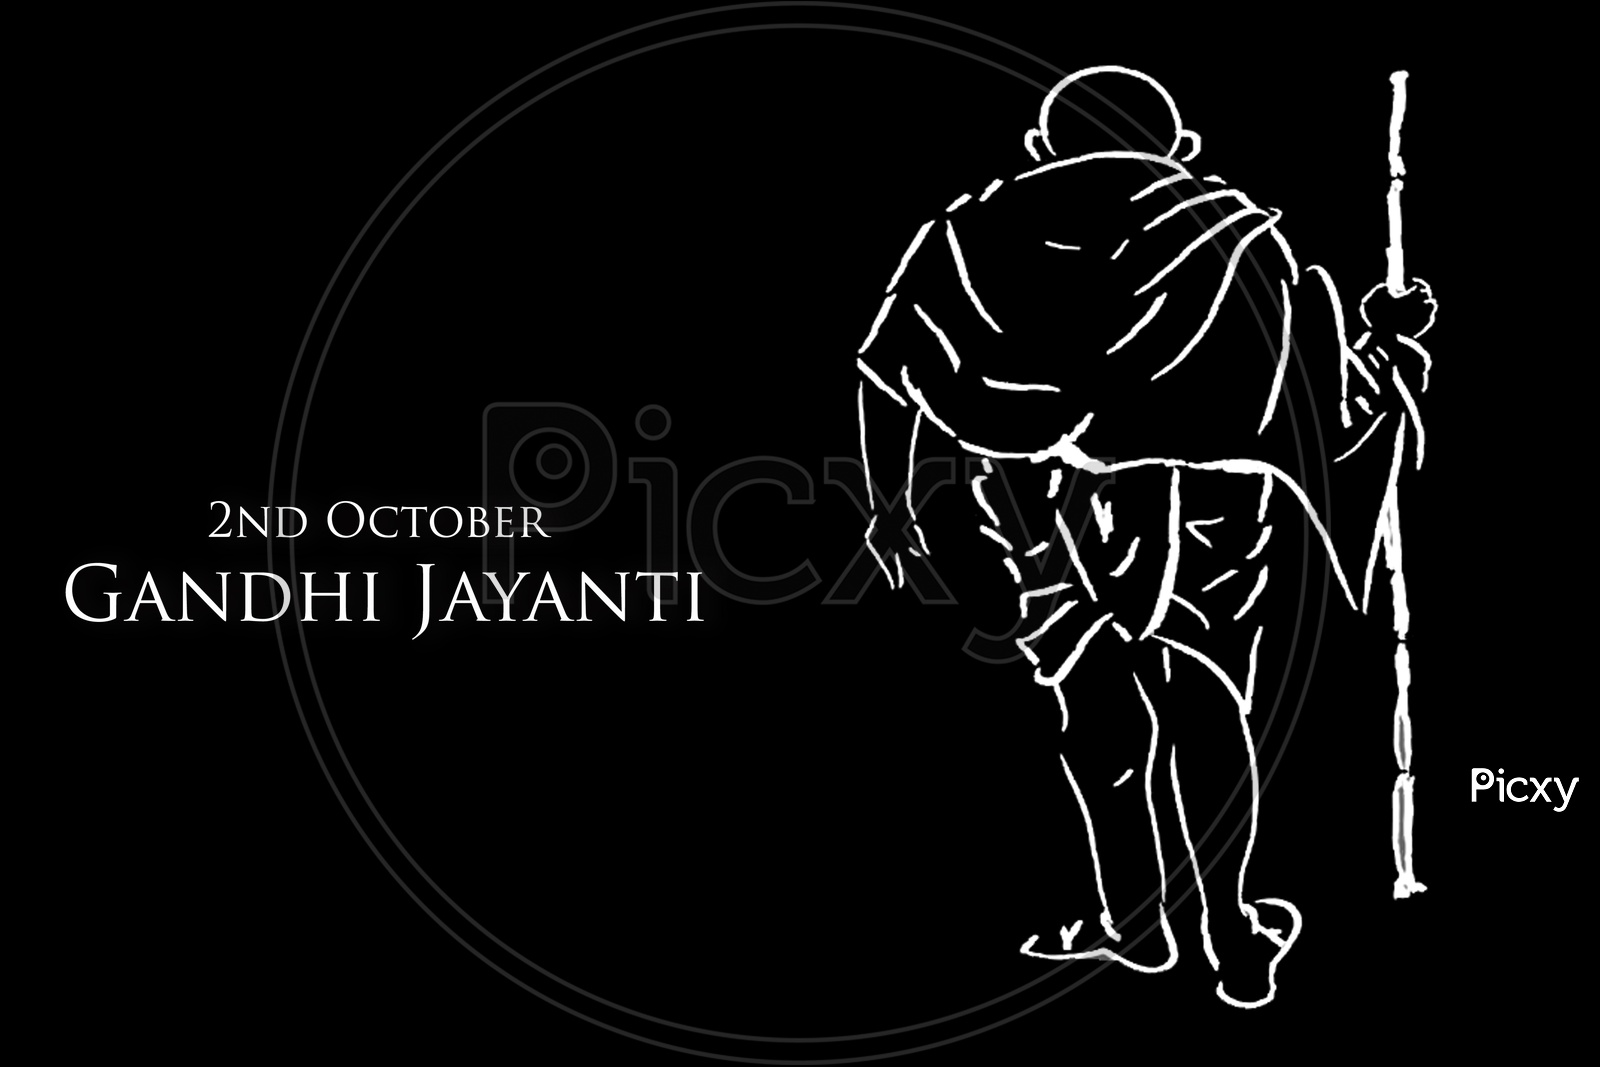 Abstract Illustrative Poster for Gandhi Jayanti on 2nd October on the eve of father of the nation Mohandas Karamchand Gandhi Birthday in India